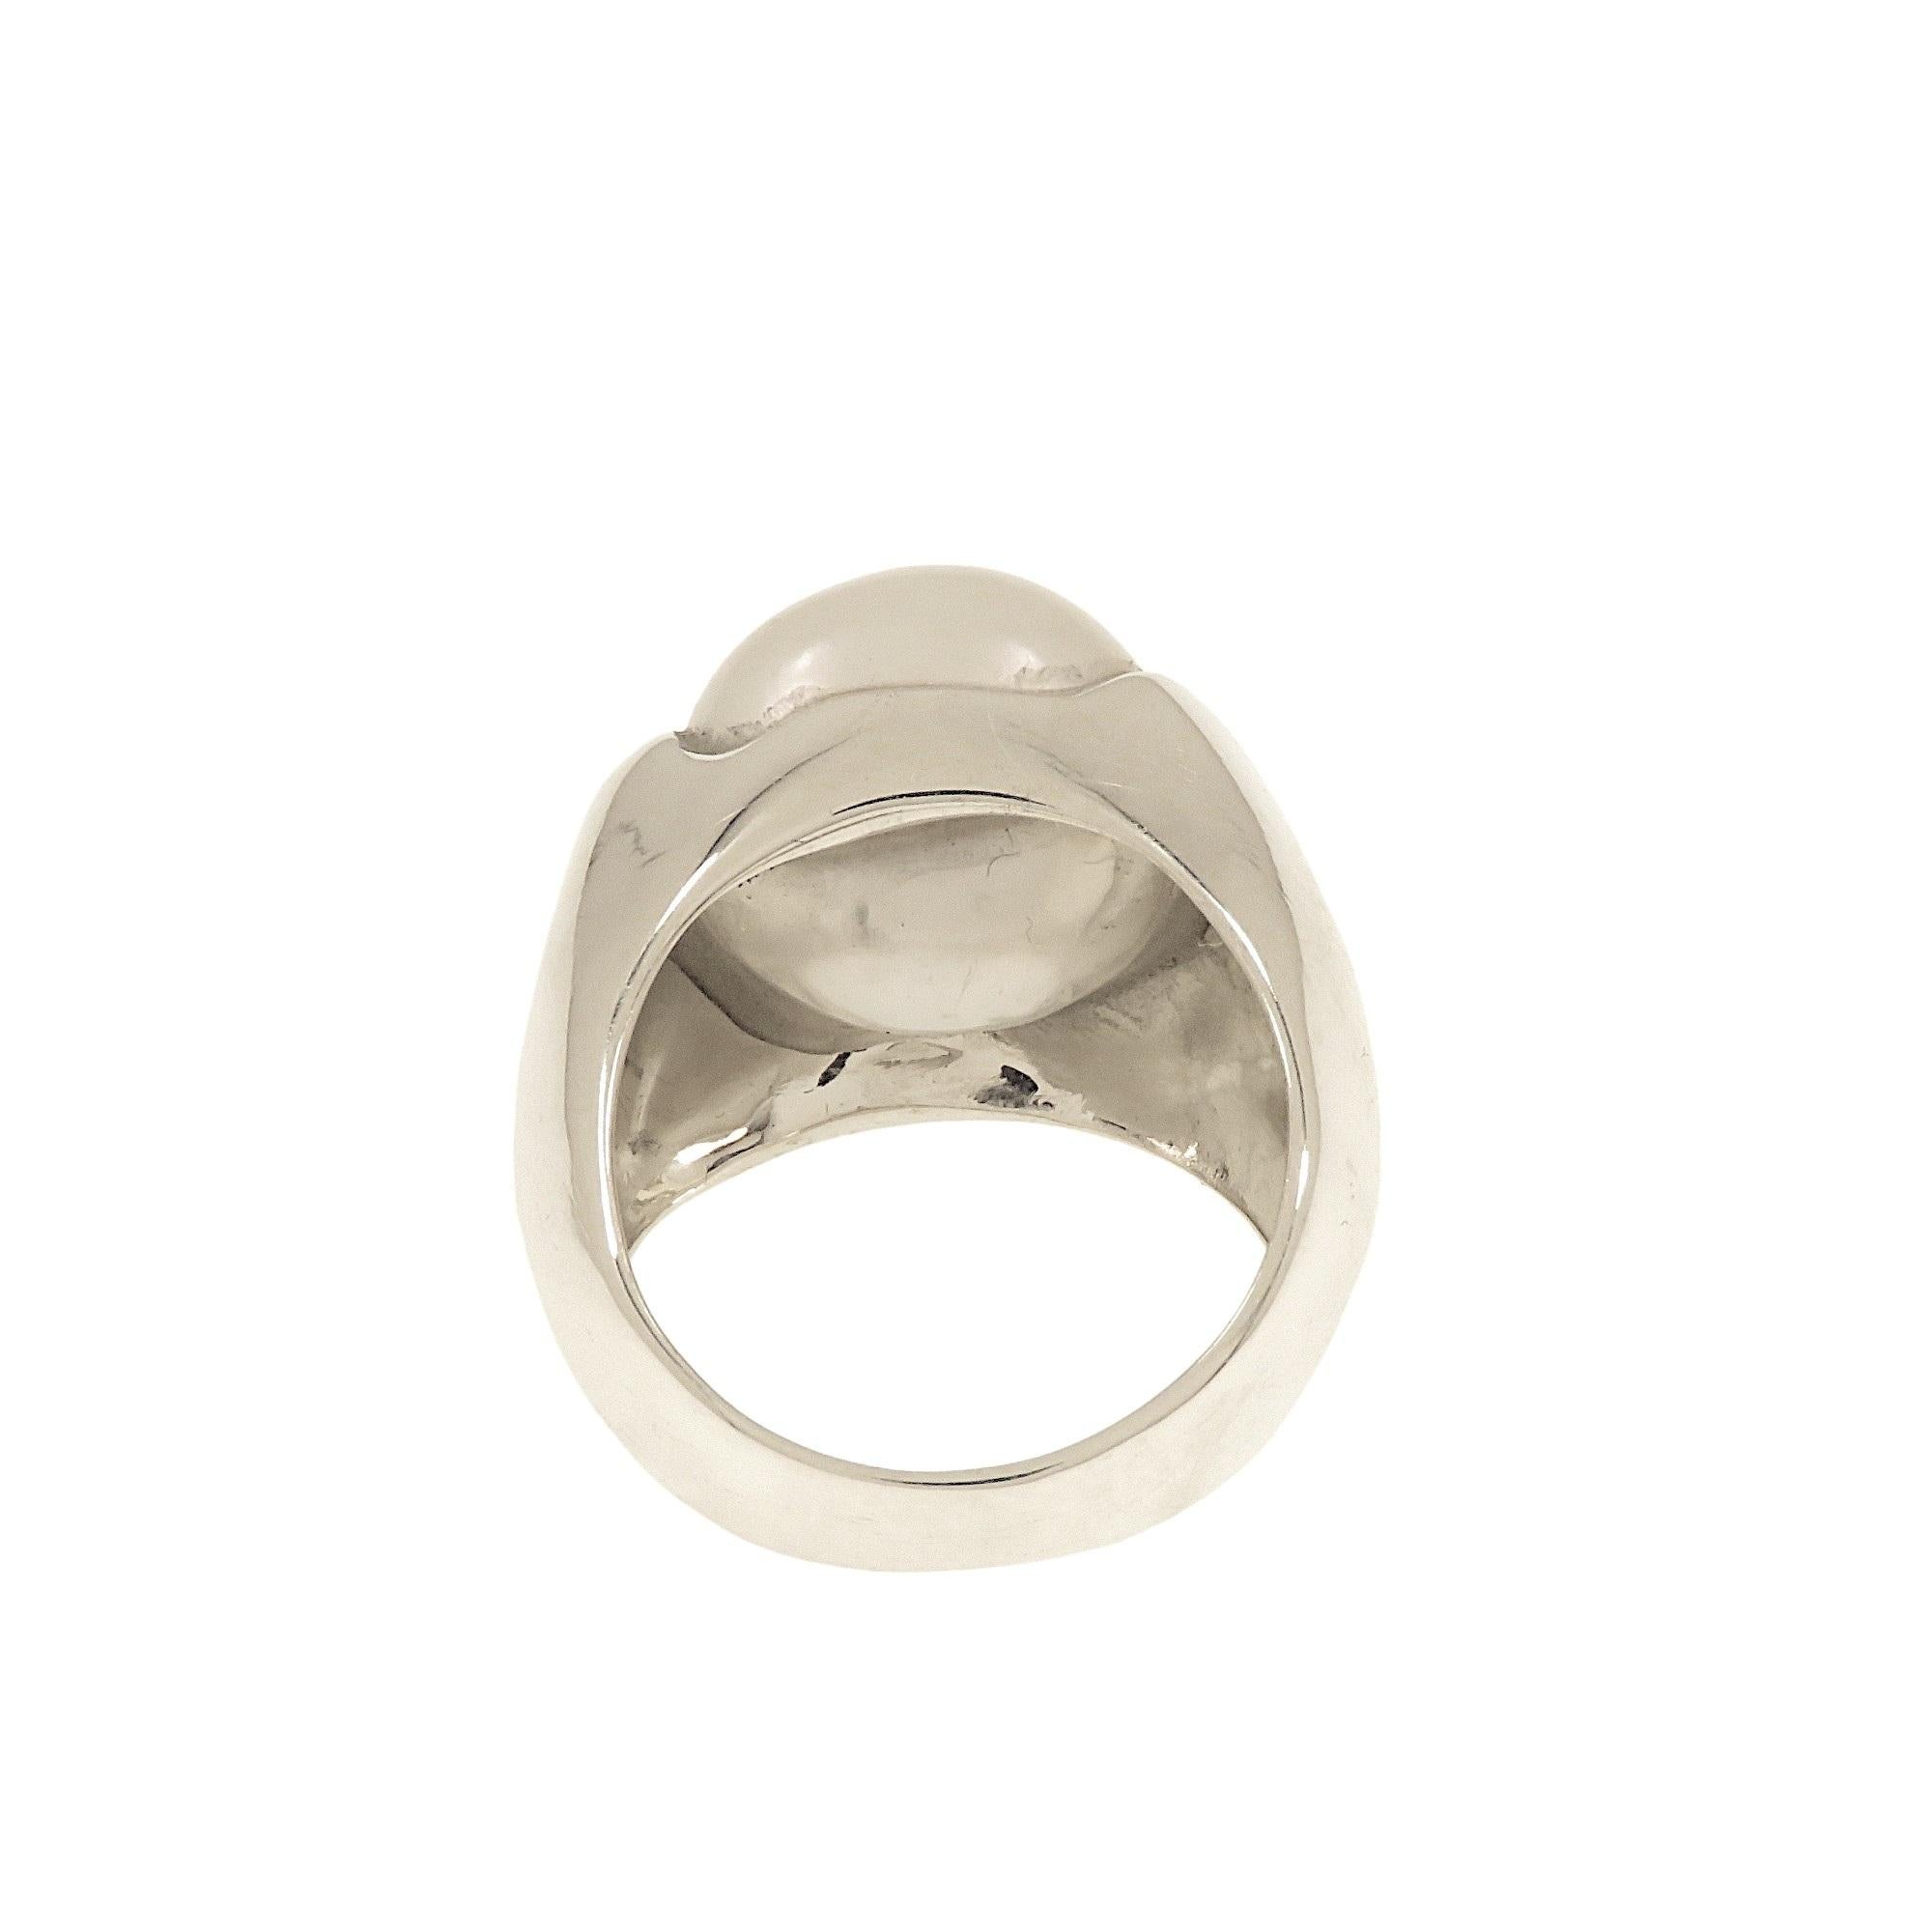 Botta jewelry ring with Australian pearl in white gold For Sale 3